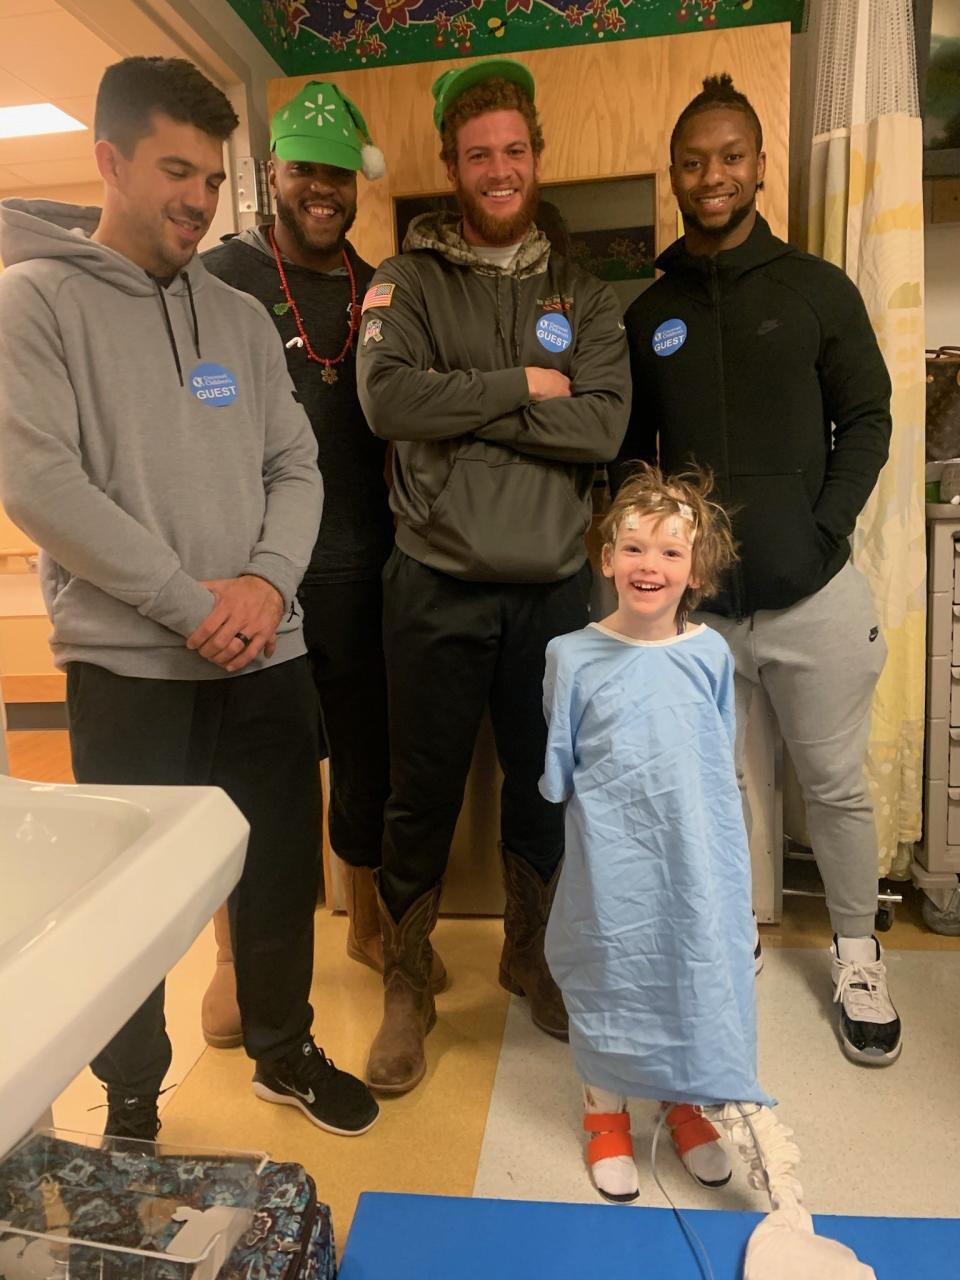 A December 2019 picture of Ephraim Lober at Cincinnati Children's Hospital Medical Center for an electroencephalogram (EEG) brain activity scan. Ephraim, then 6, is posing with players from the Cincinnati Bengals, who were making a Christmas-time visit to patients that day